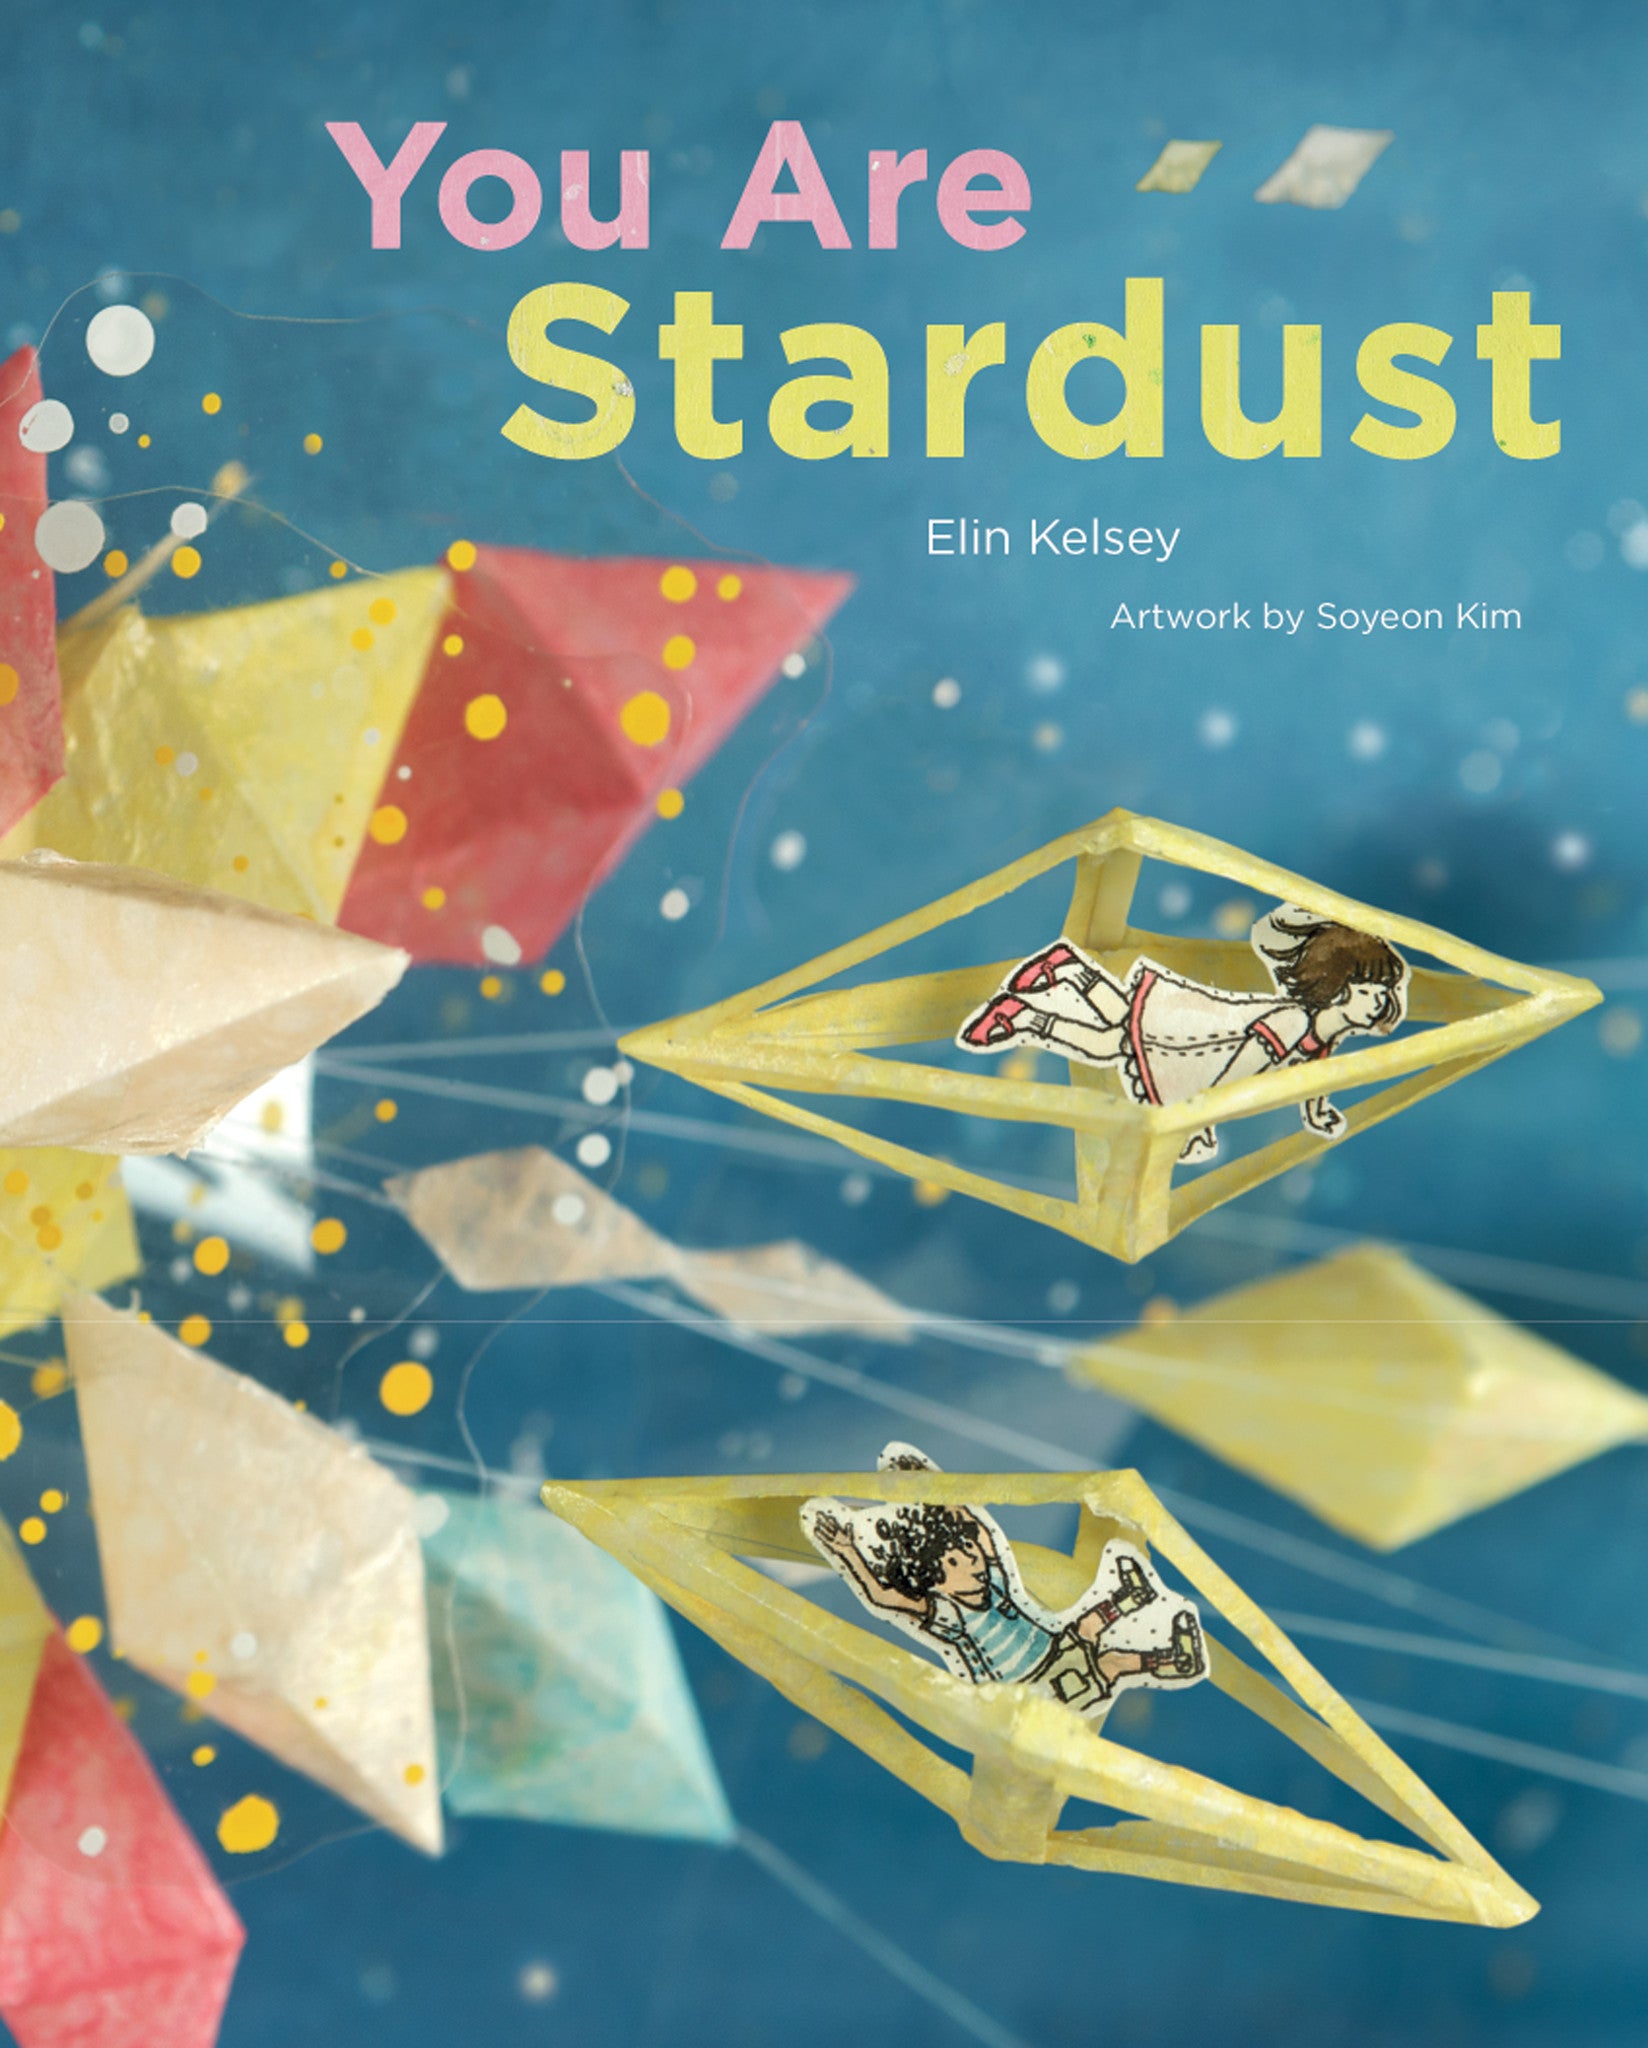 You Are Stardust - Owlkids - Reading for kids and literacy resources for parents made fun. Books helping kids to learn.